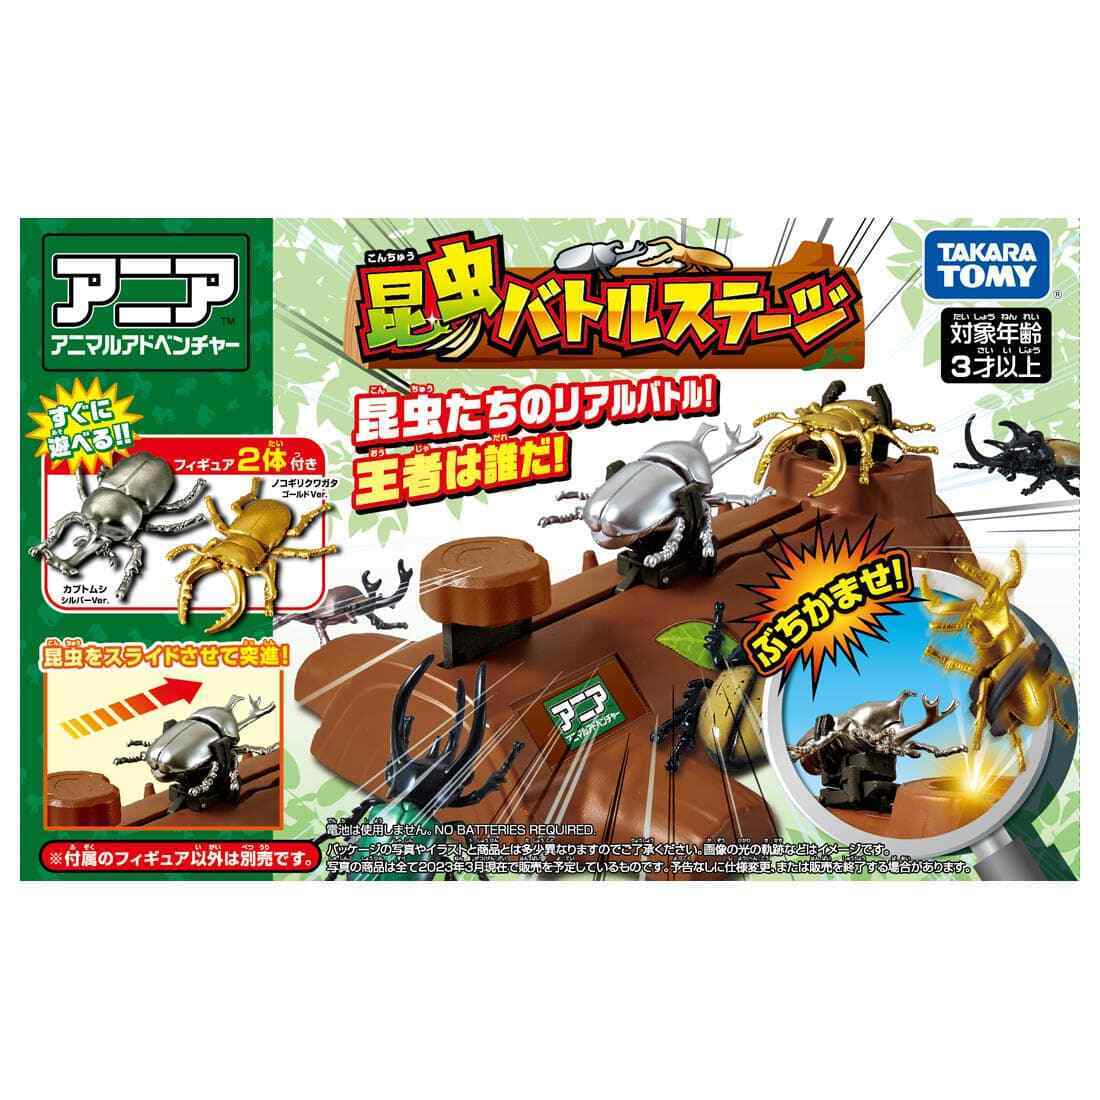 Takara Tomy Ania Insect Battle Stage Playset with 2 figures